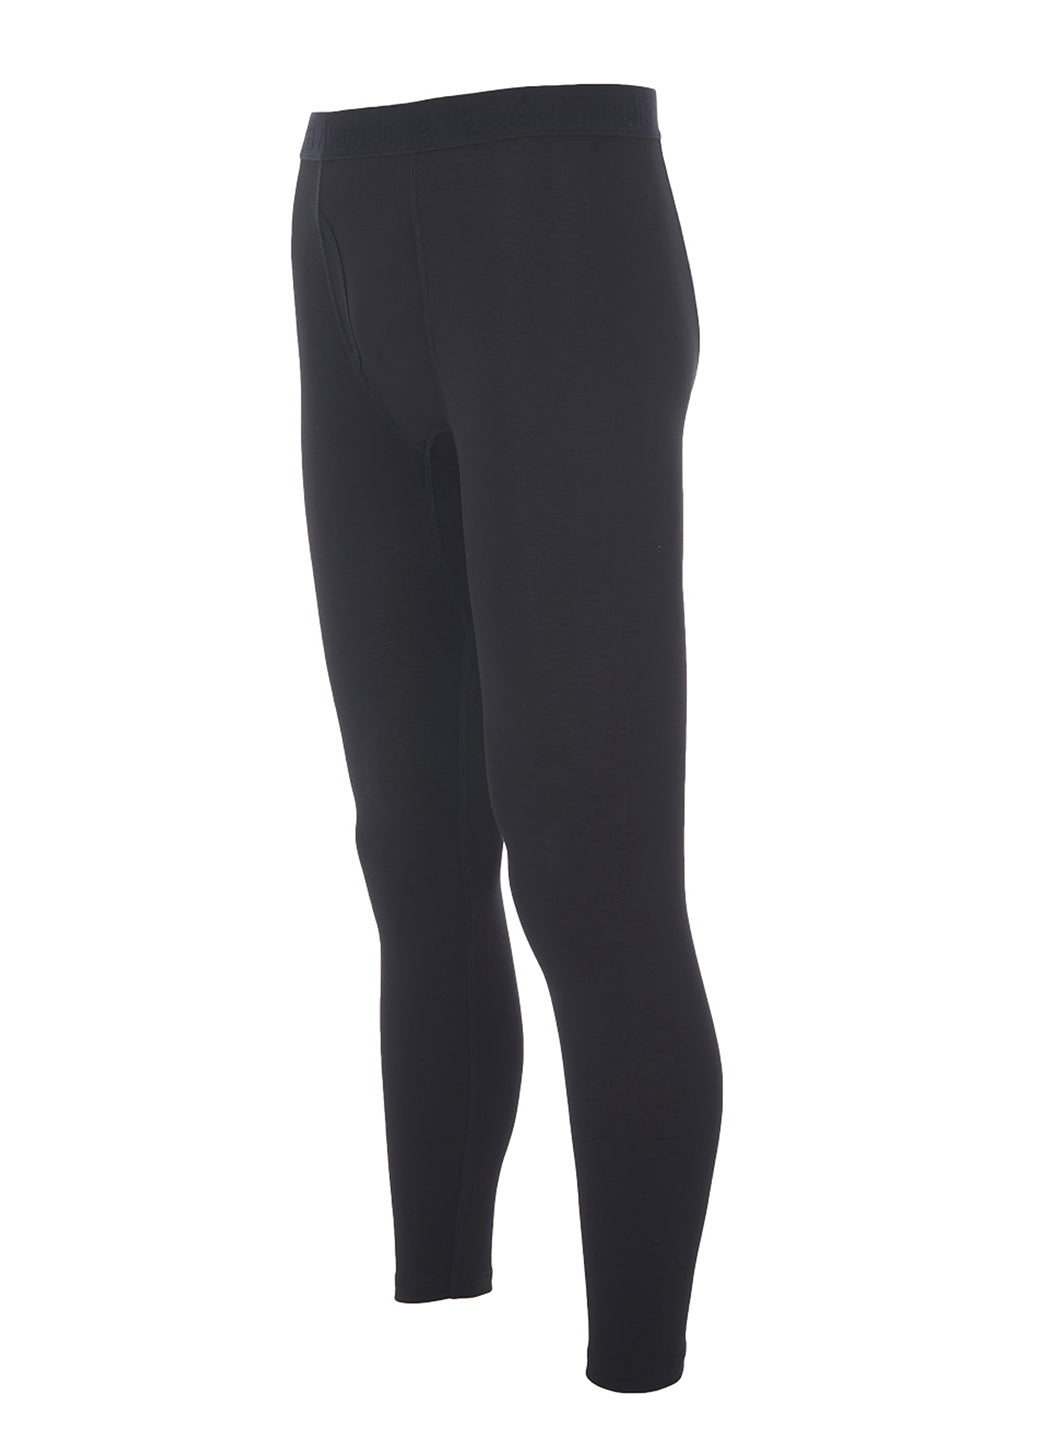 Avalanche Outdoor Athletic Leggings for Women